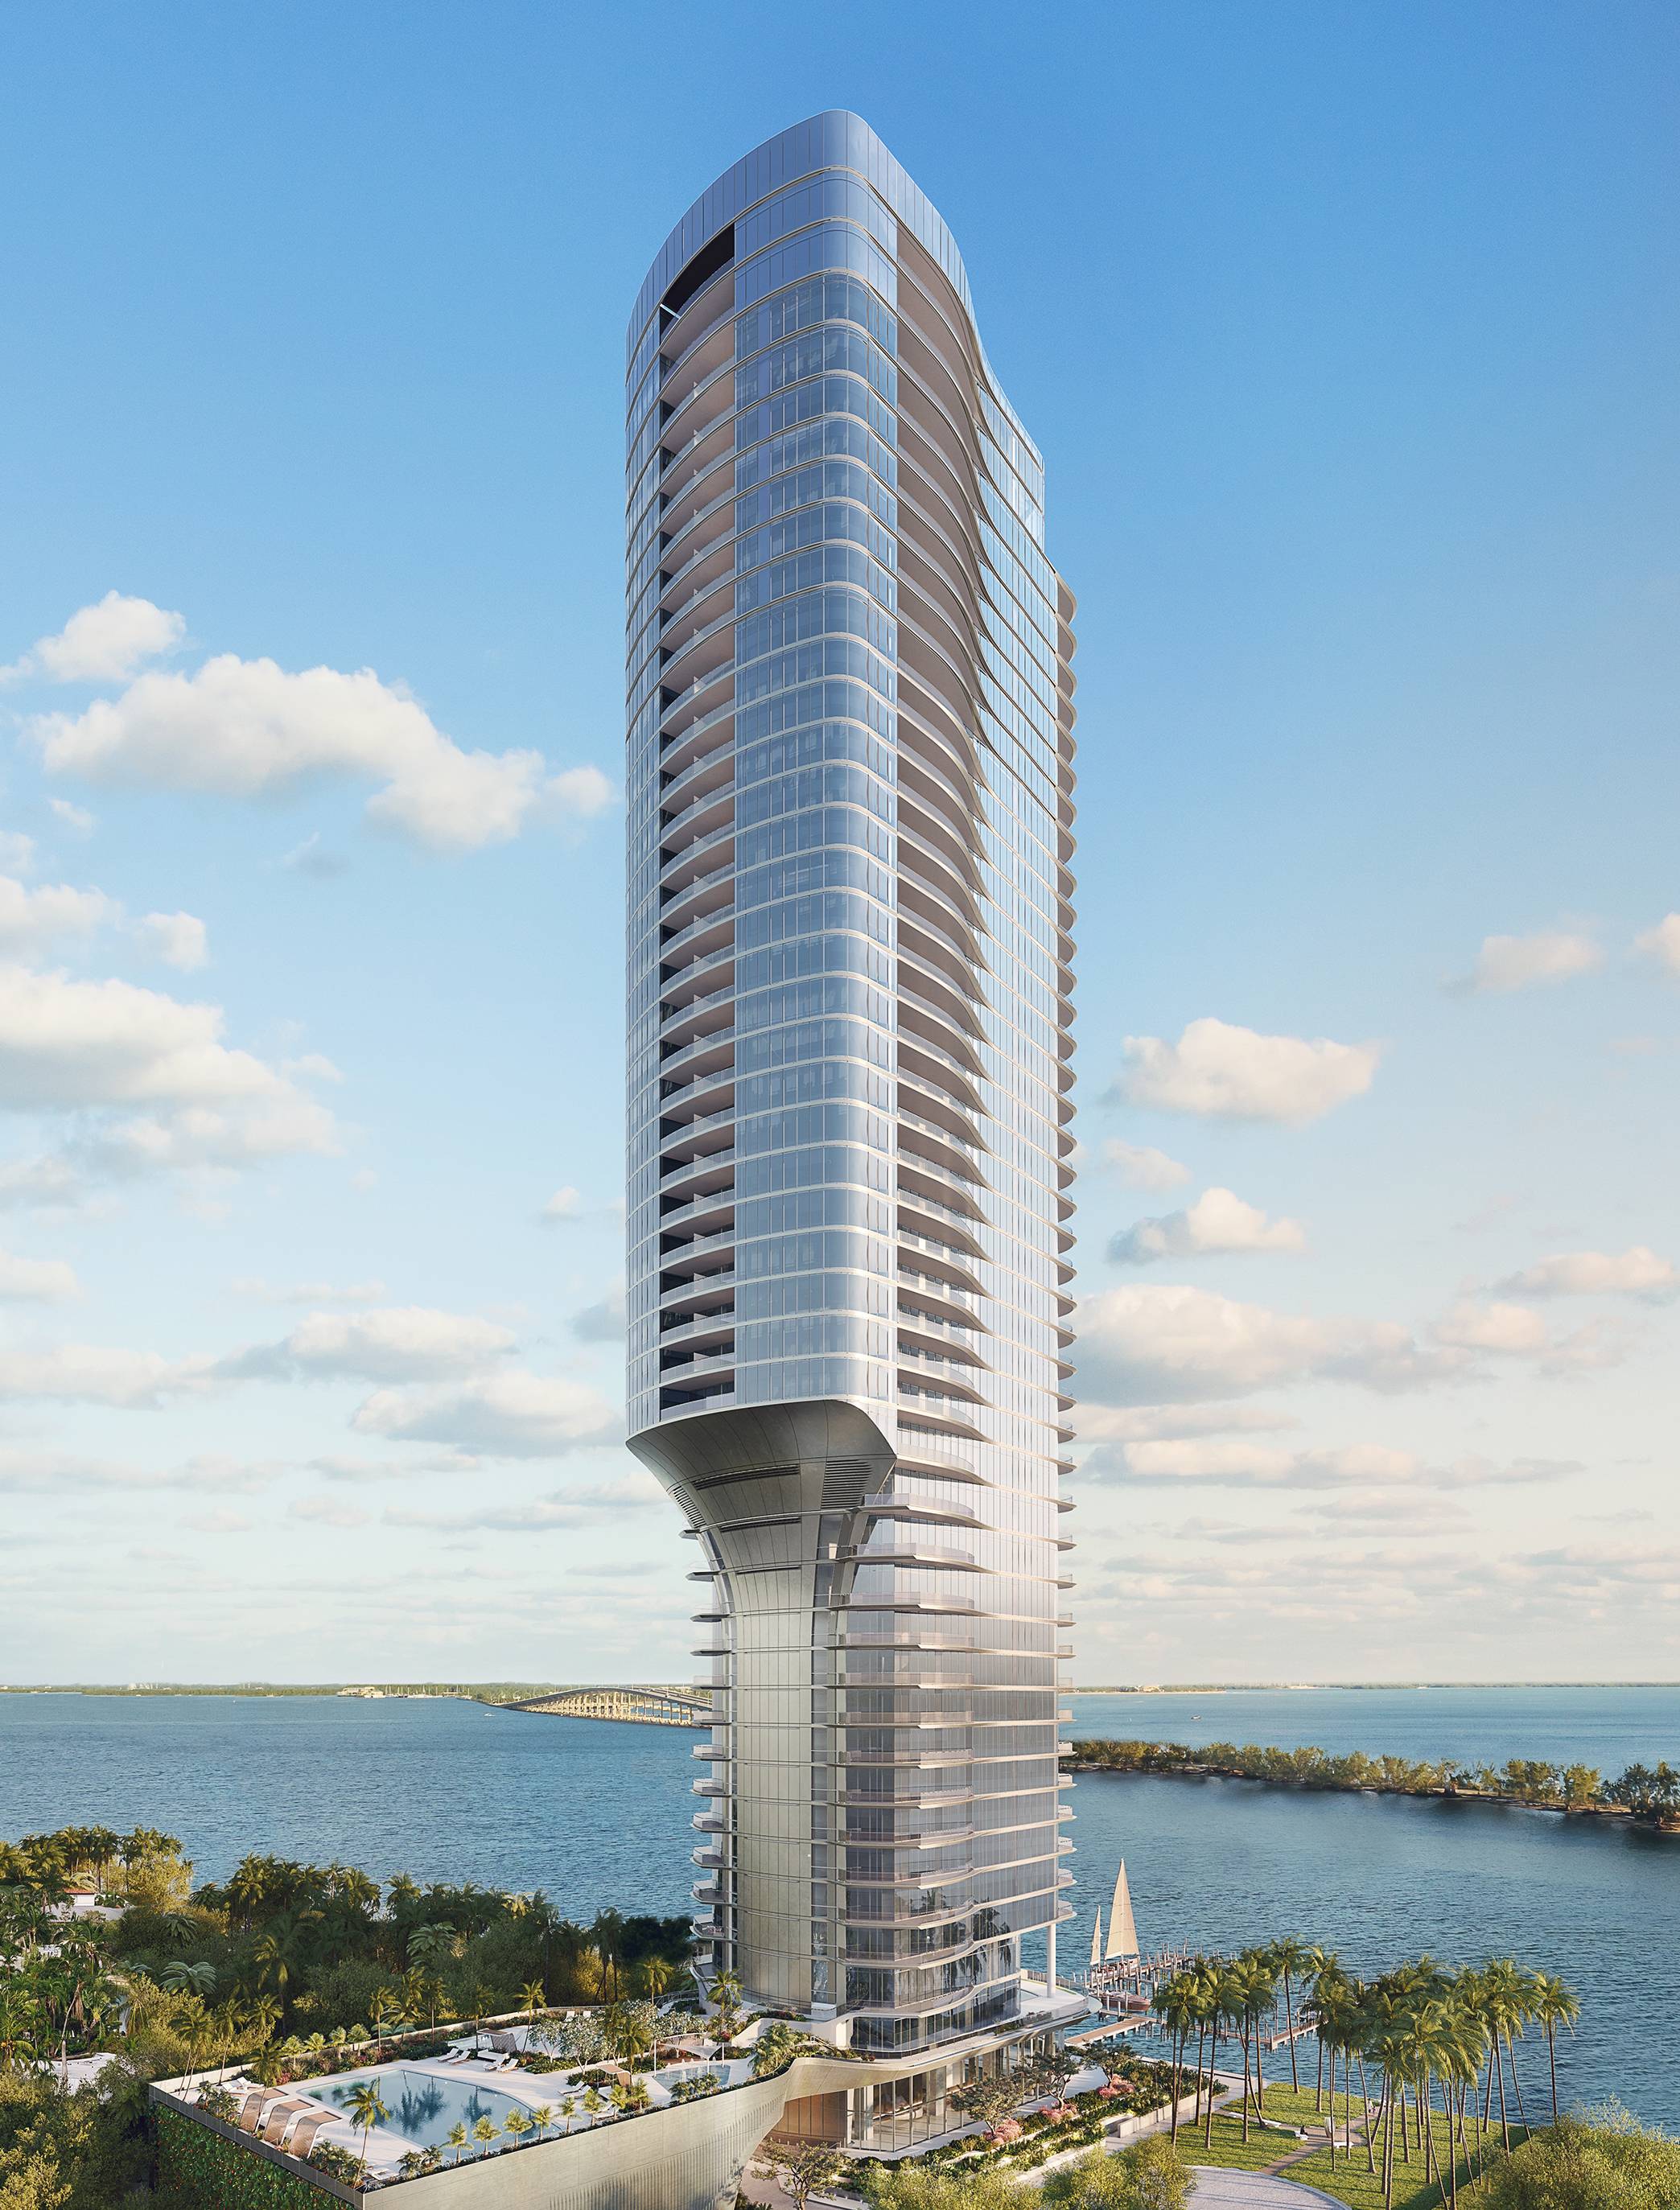 UNA Residences | Luxury Water Front Condo in the Heart of Miami with Private Dock, Marina | 5 Bed 6.5 Bath